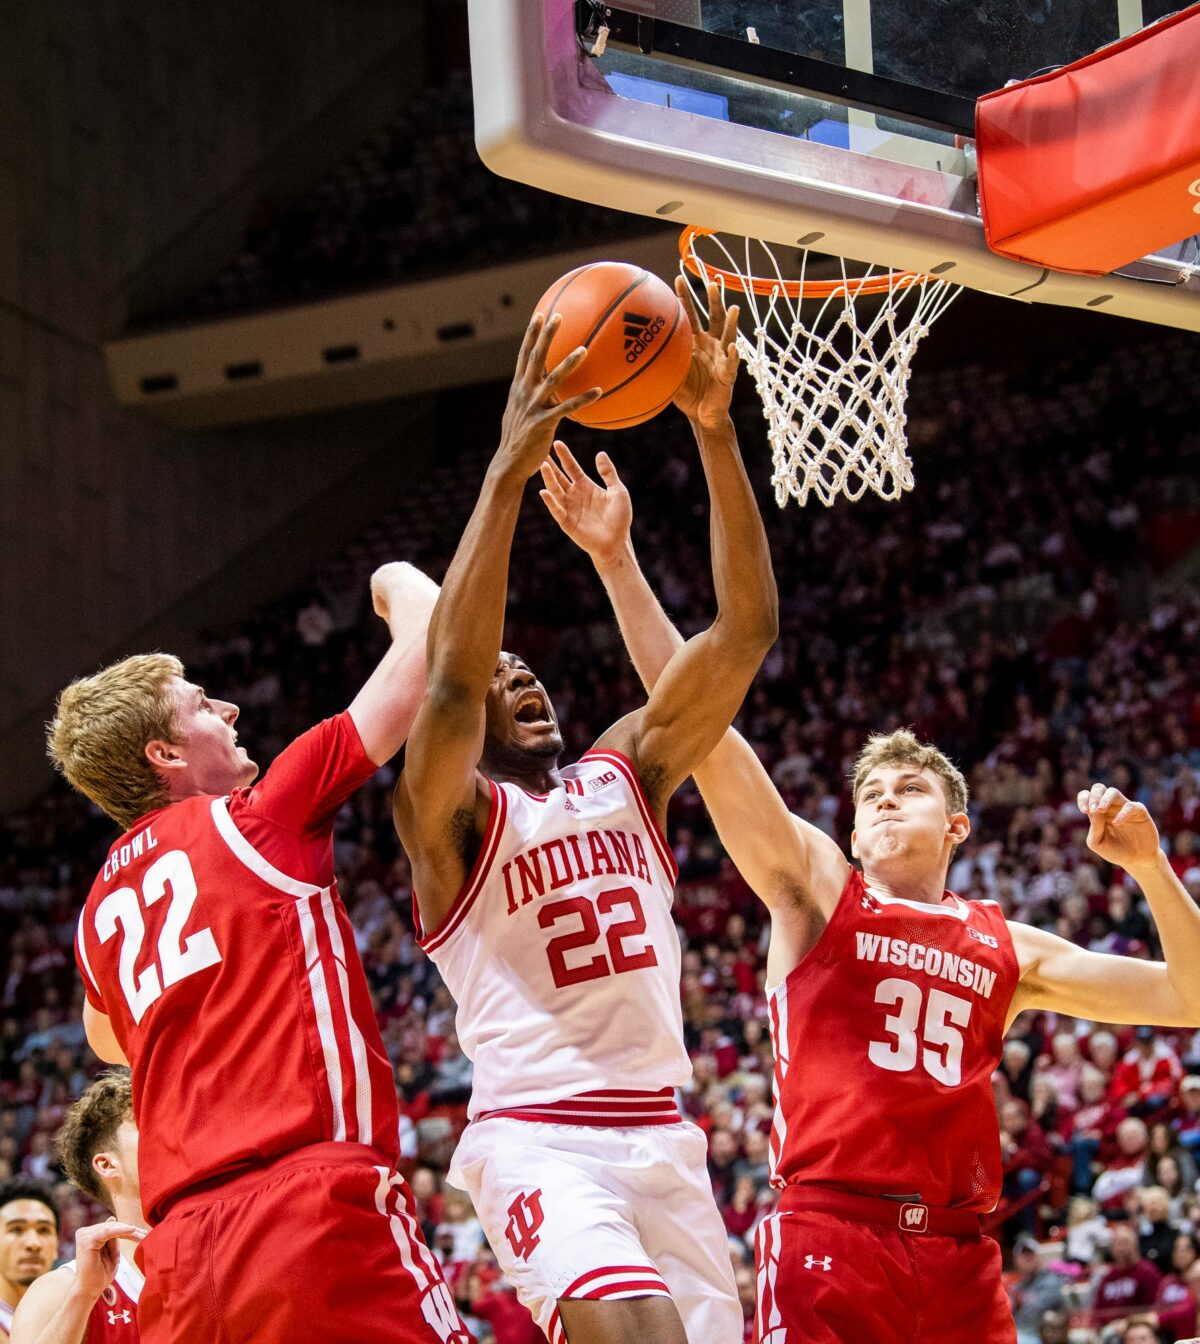 Badgers’ losing streak reaches three games, fall to Indiana 63-45 on the road